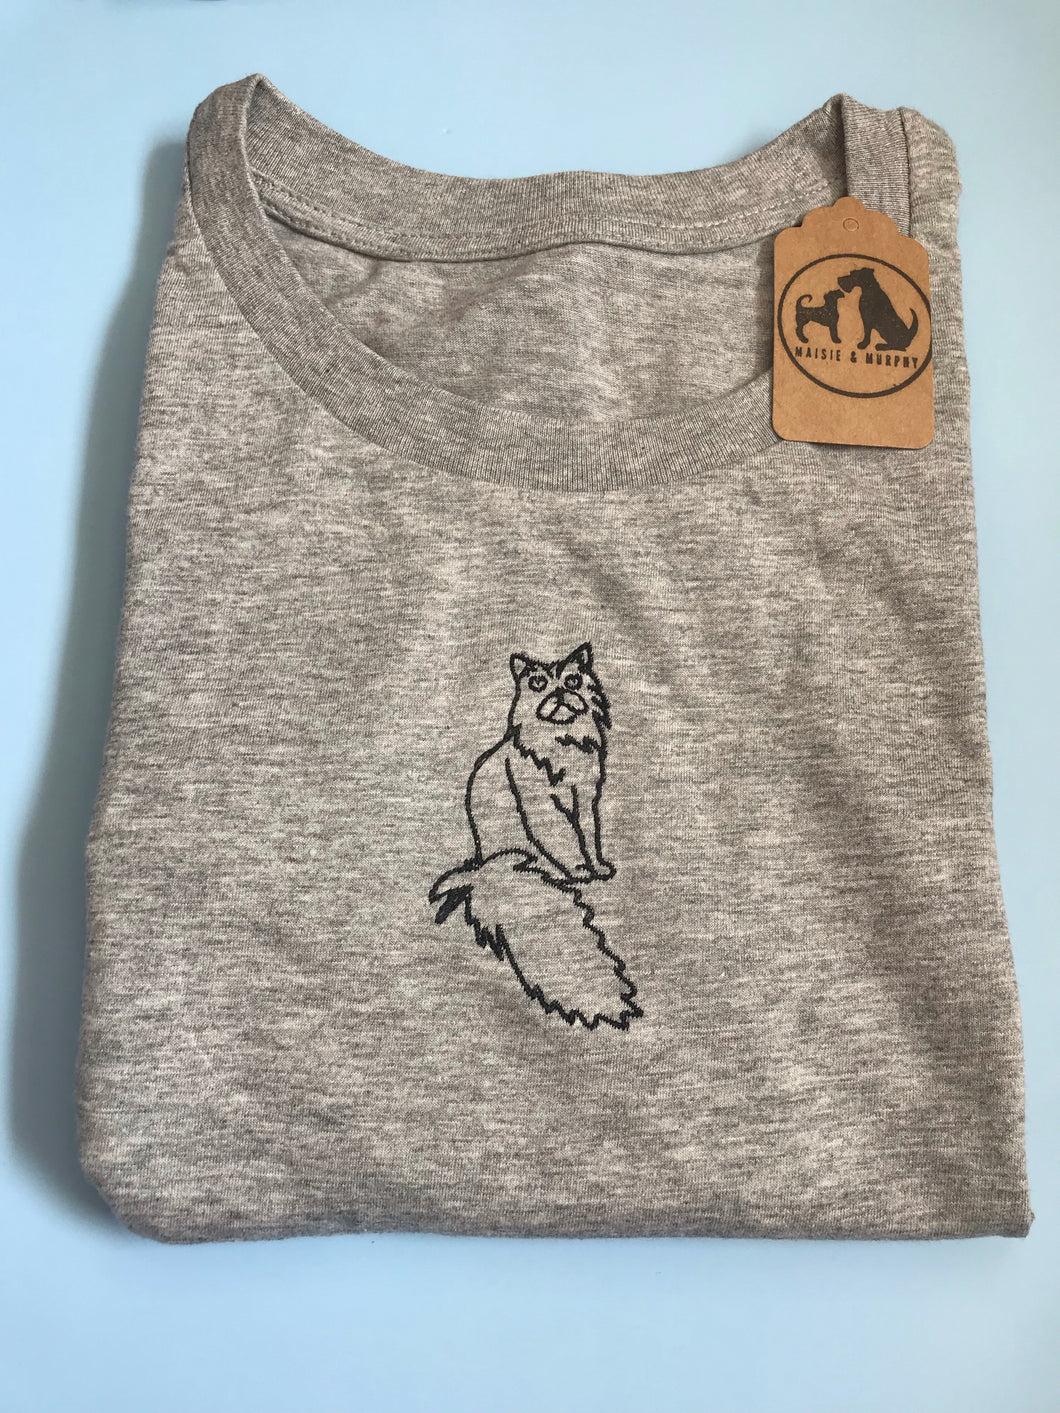 Fluffy Cat Organic T-shirt- Gifts for Persian/ rag doll lovers and owners.